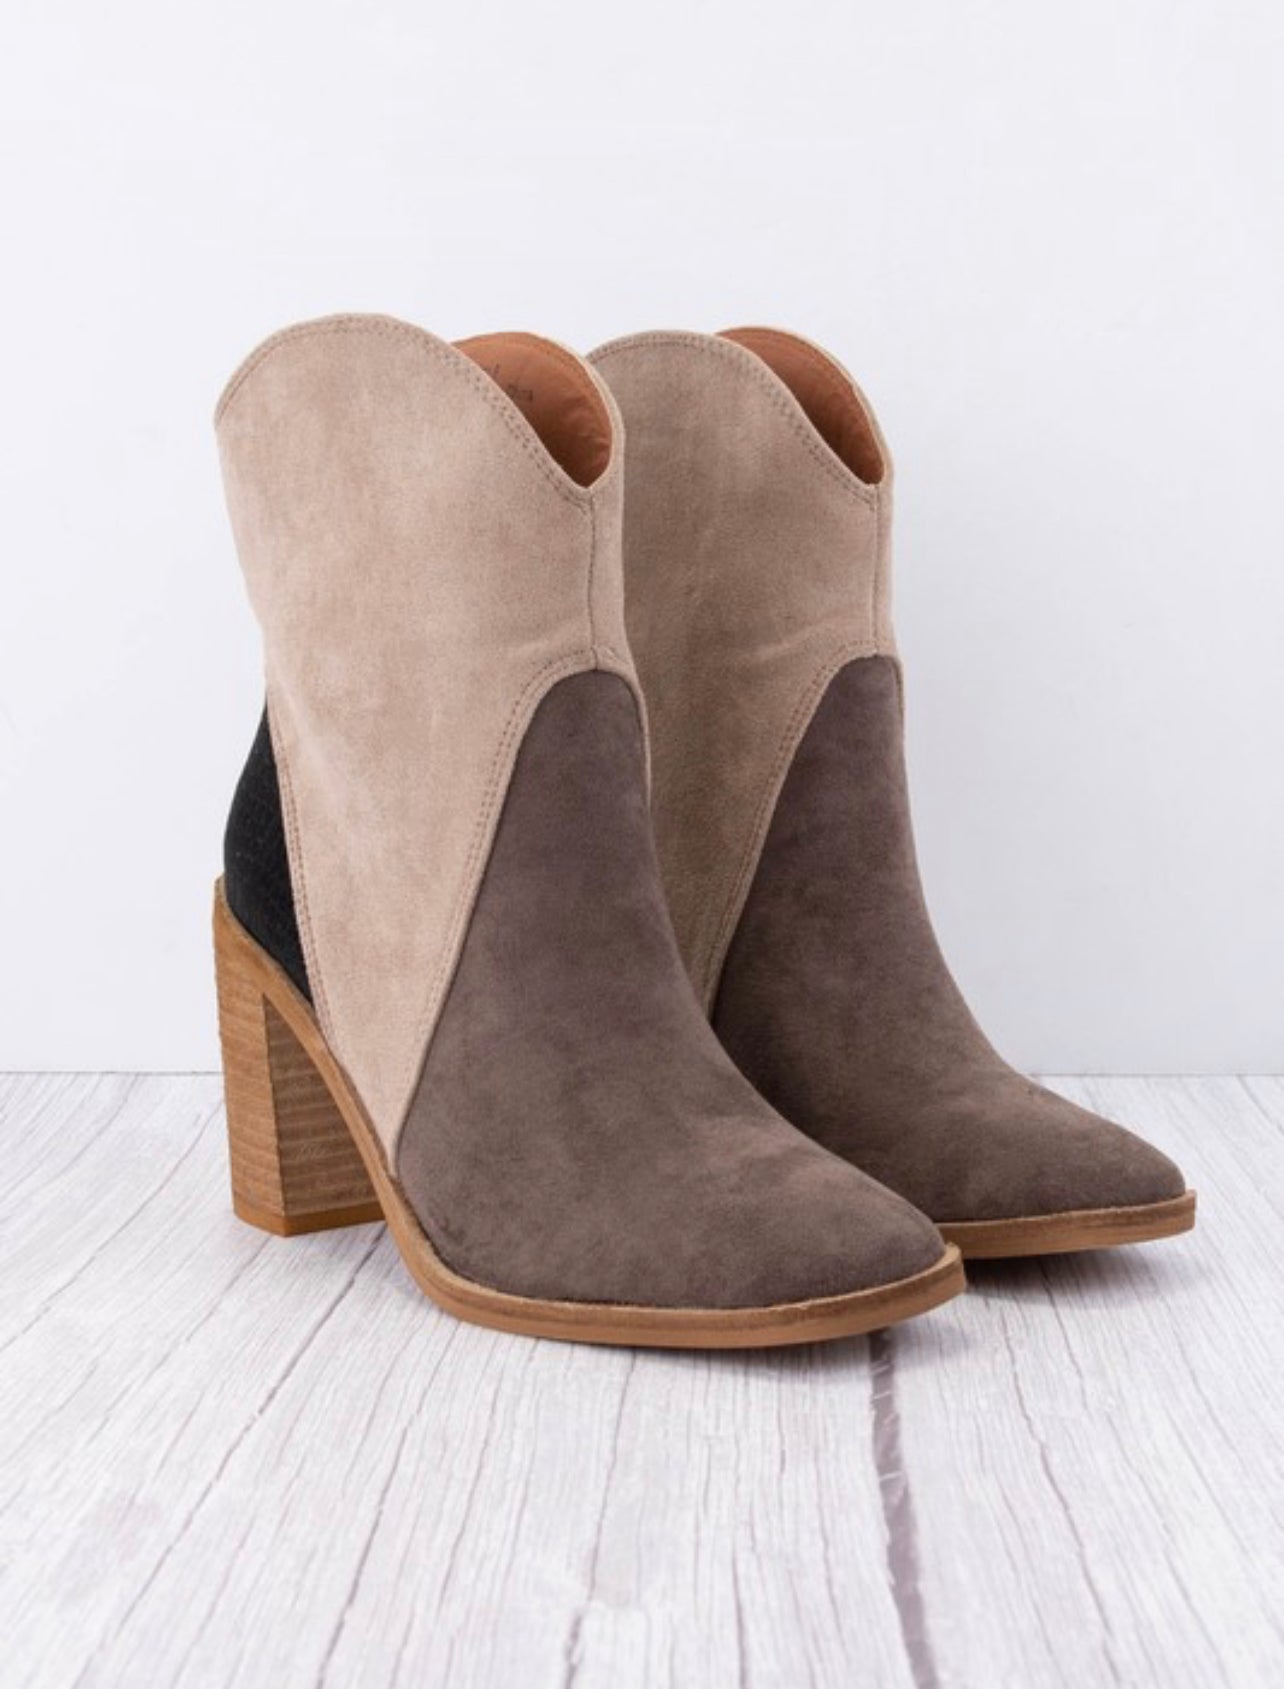 The Kendall Bootie